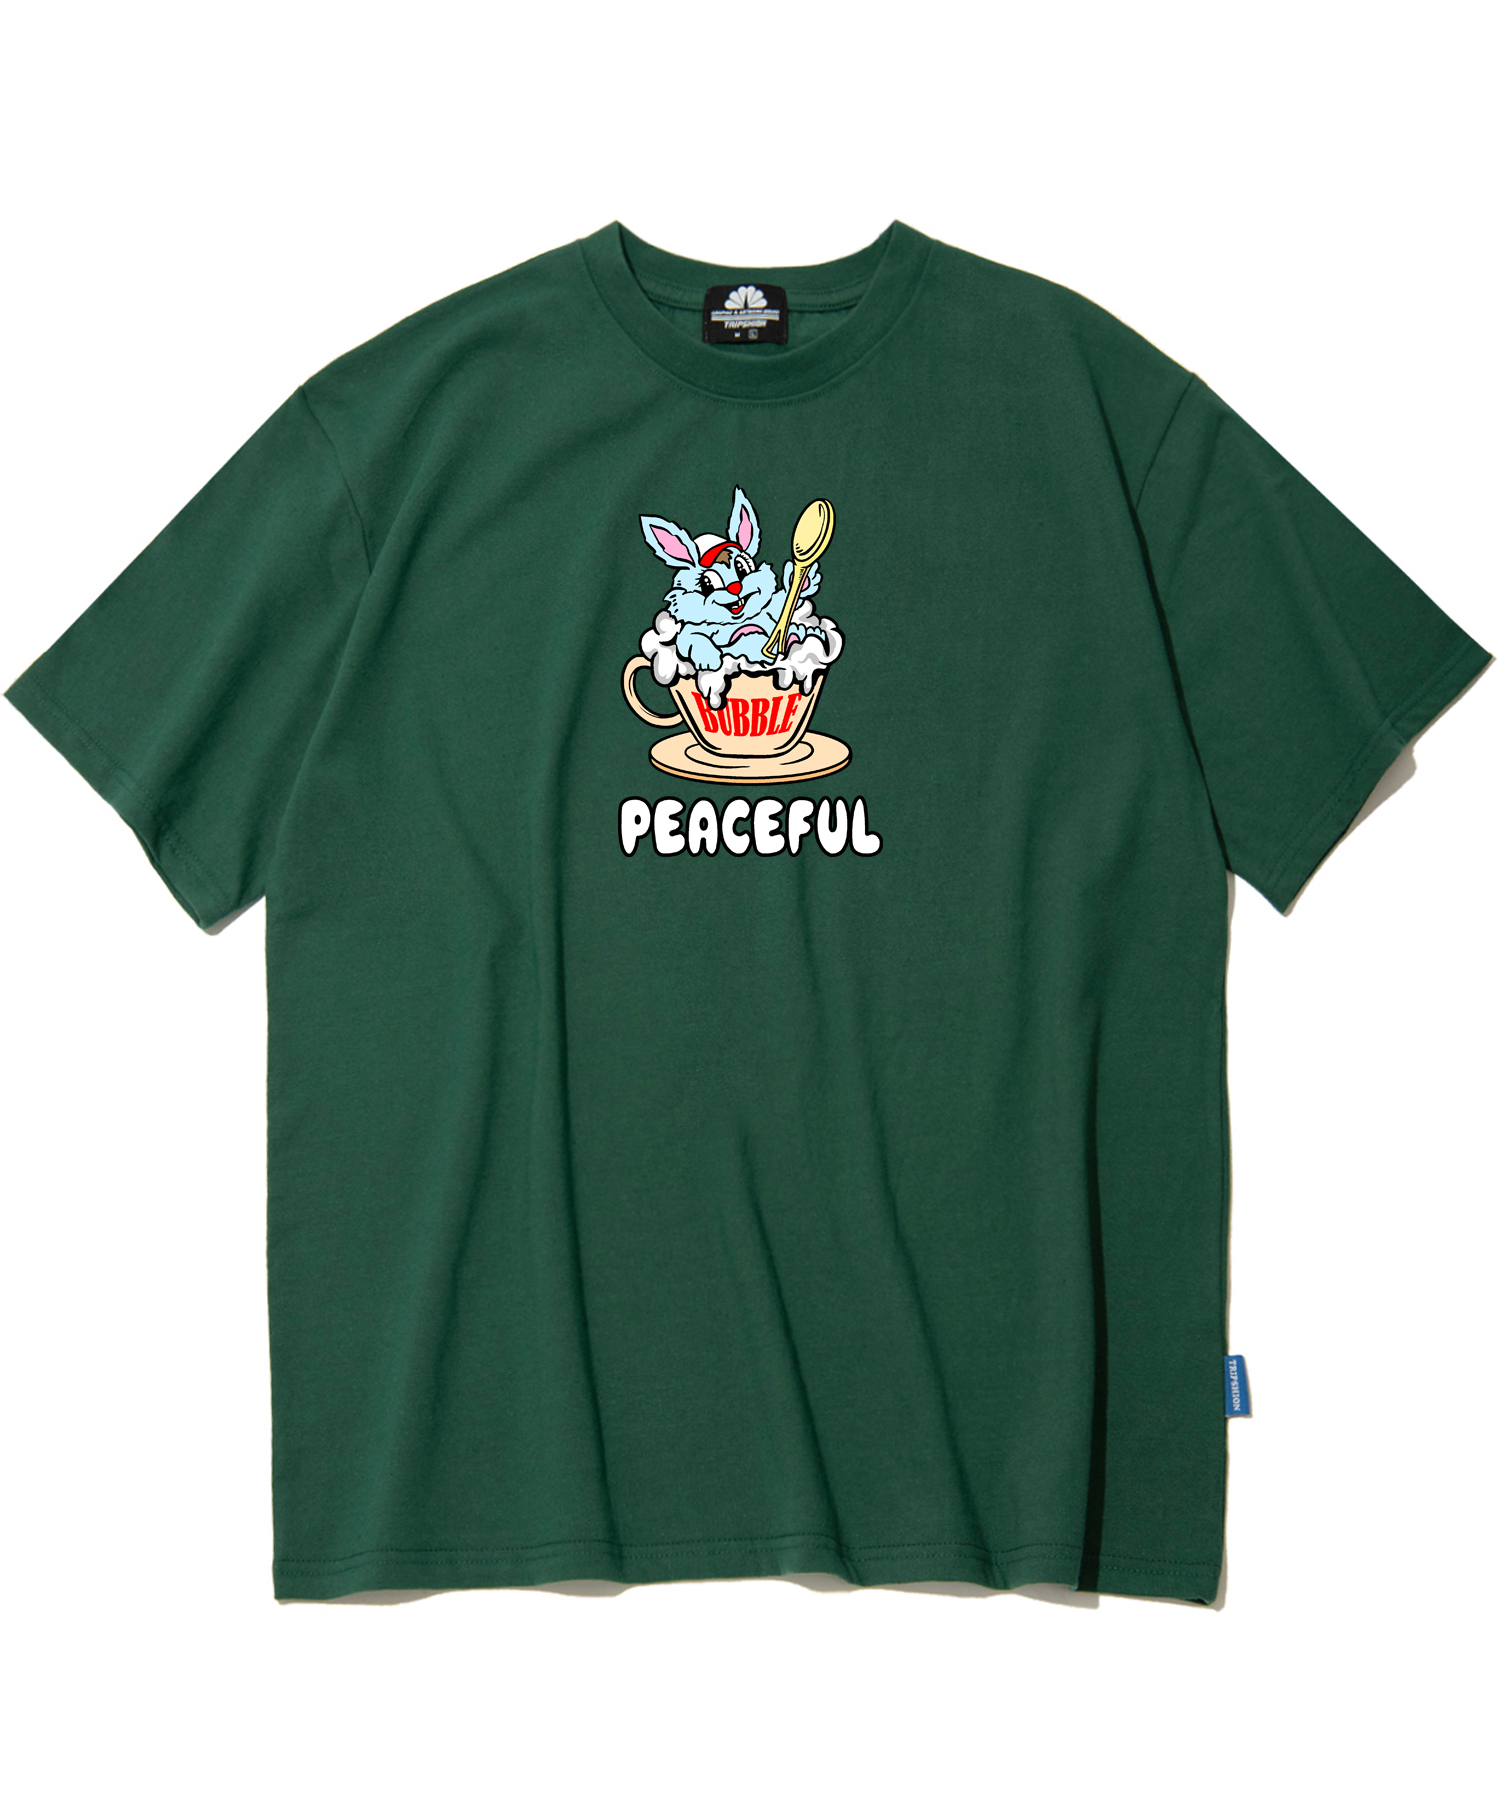 PEACEFUL RABBIT GRAPHIC T-SHIRTS - GREEN